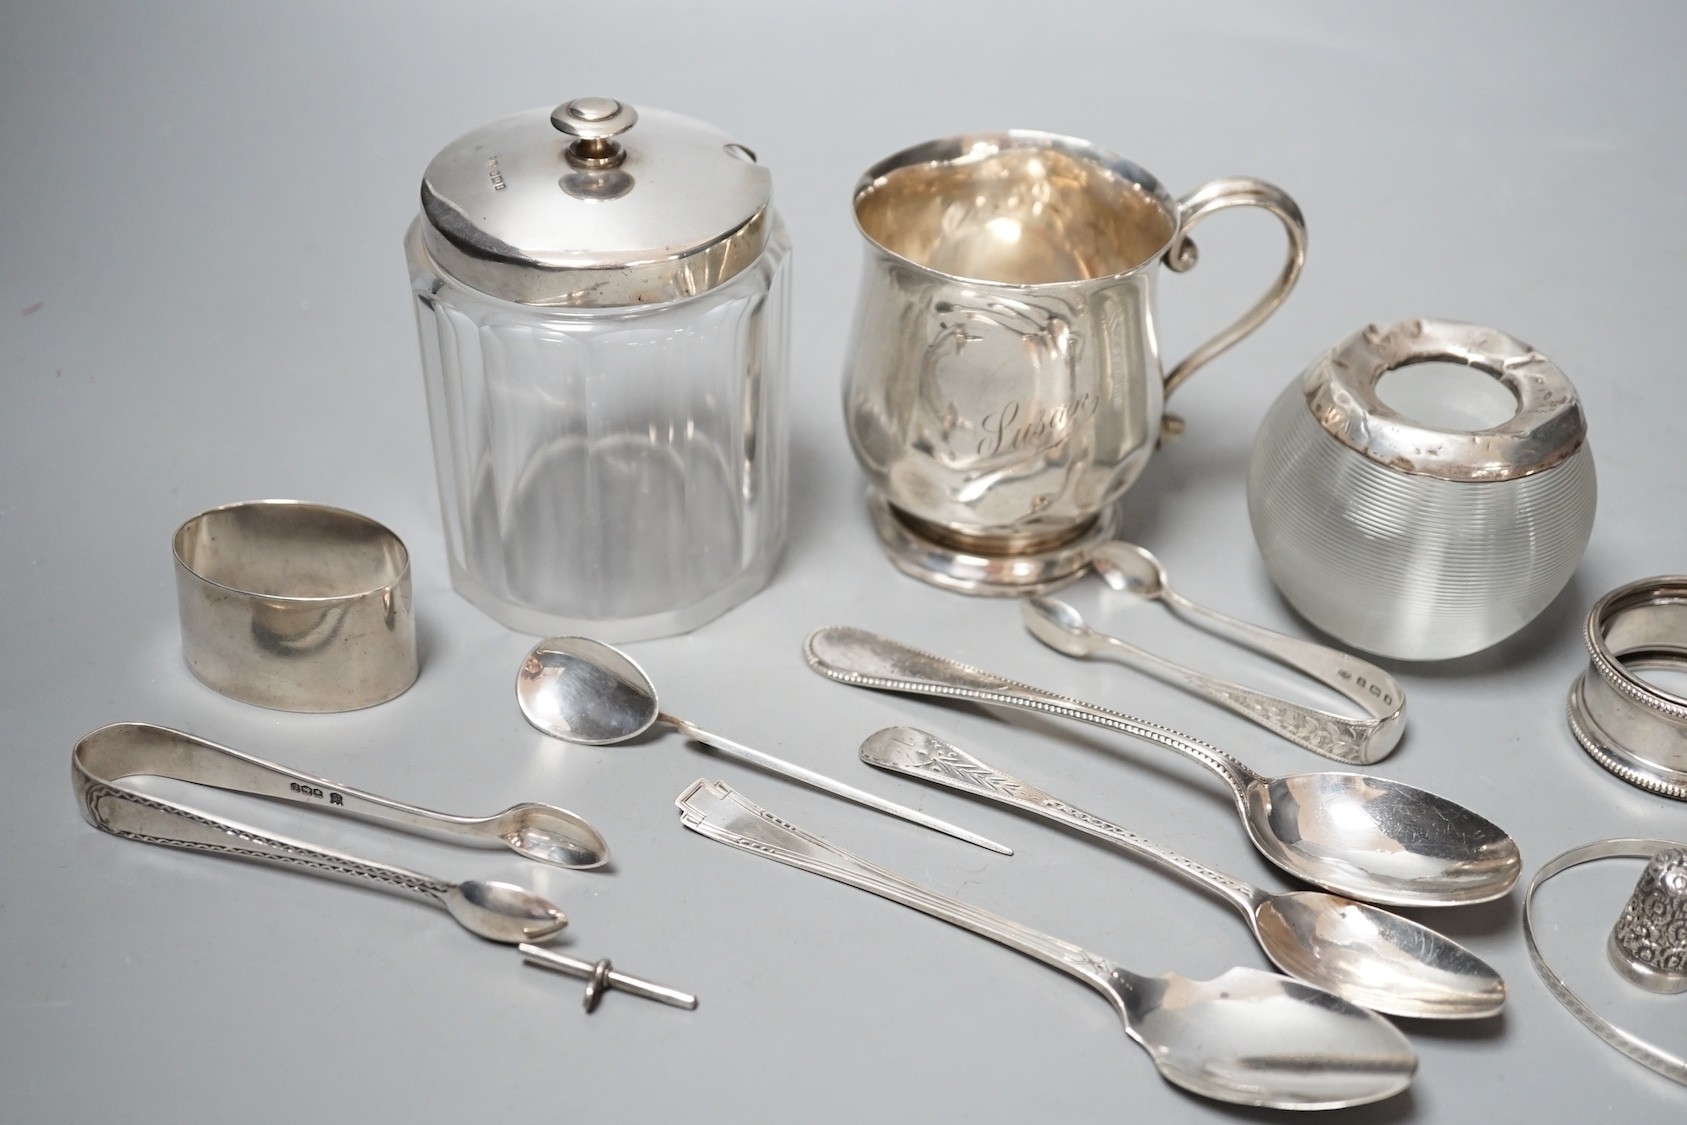 Sundry small silver including a mounted glass match tidy(a.f.), a silver christening mug(a.f.), mounted glass preserve jar, three napkin rings, six items of flatware, thimble T-bar and a sterling bangle.